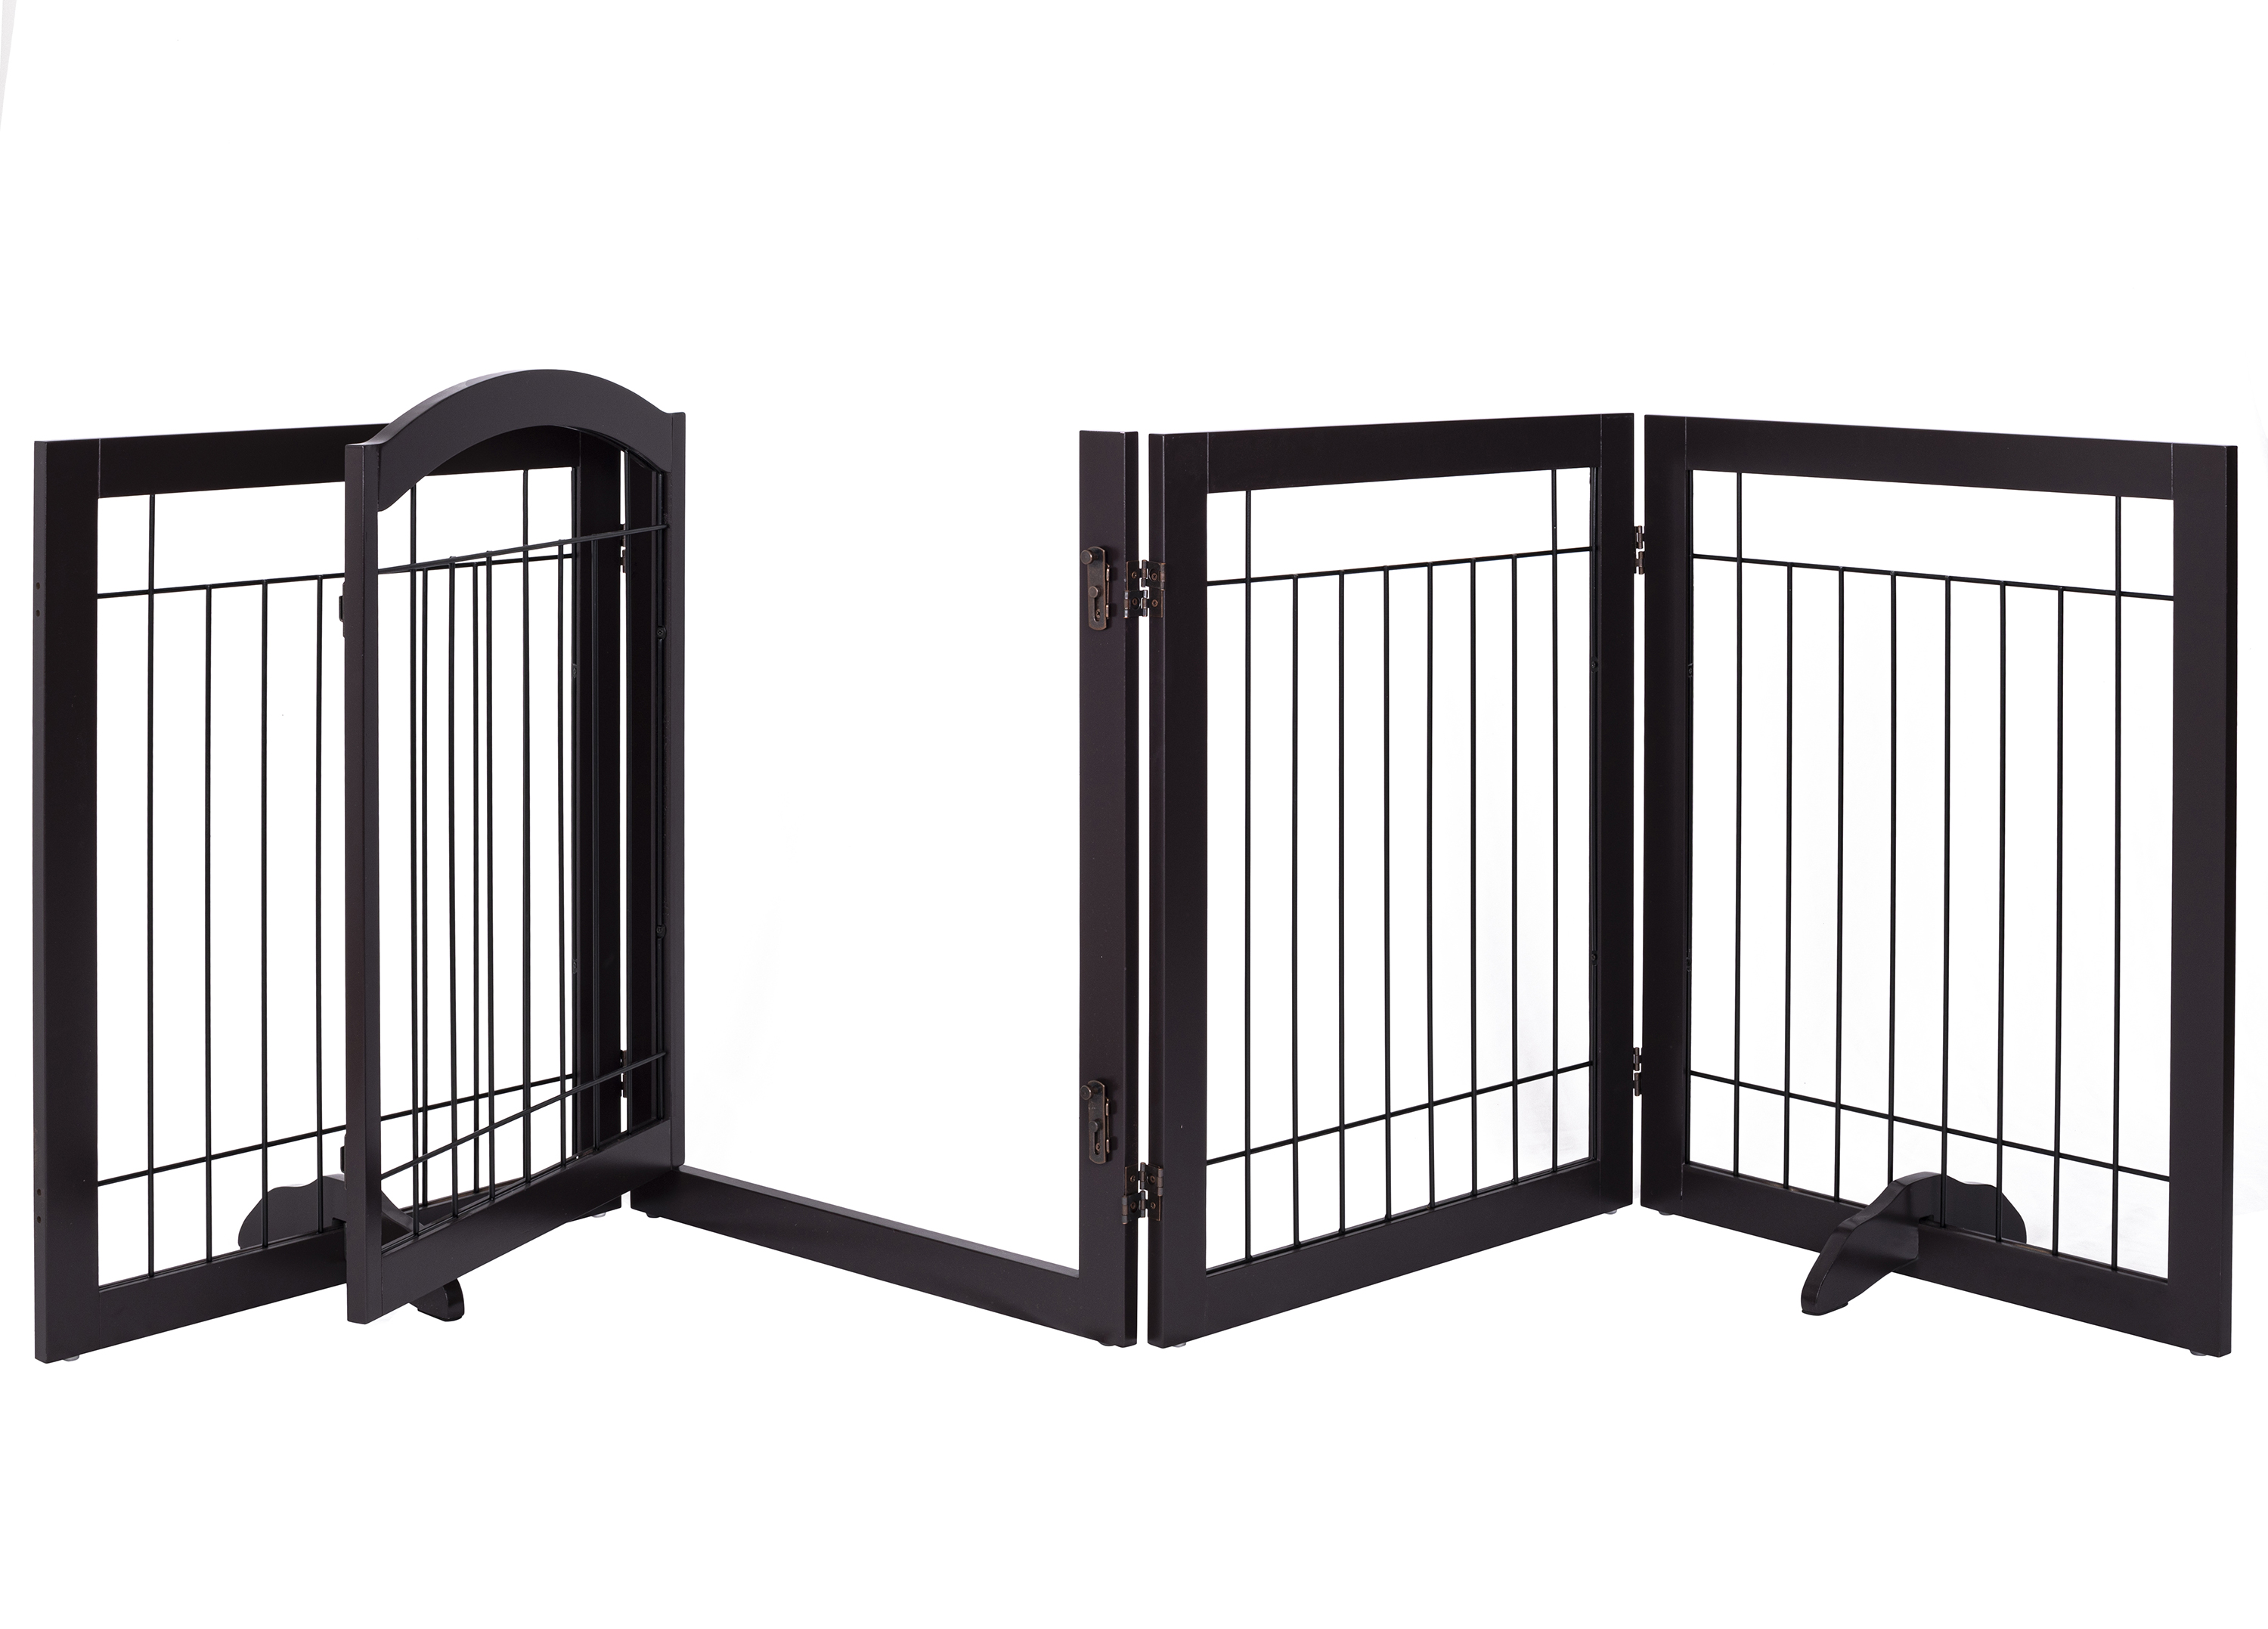 PAWLAND 96-inch Extra Wide 30-inches Tall Dog gate with Door Walk Through, Freestanding Wire Pet Gate for The House, Doorway, Stairs, Pet Puppy Safety Fence, Support Feet Included(Espresso) - image 3 of 6